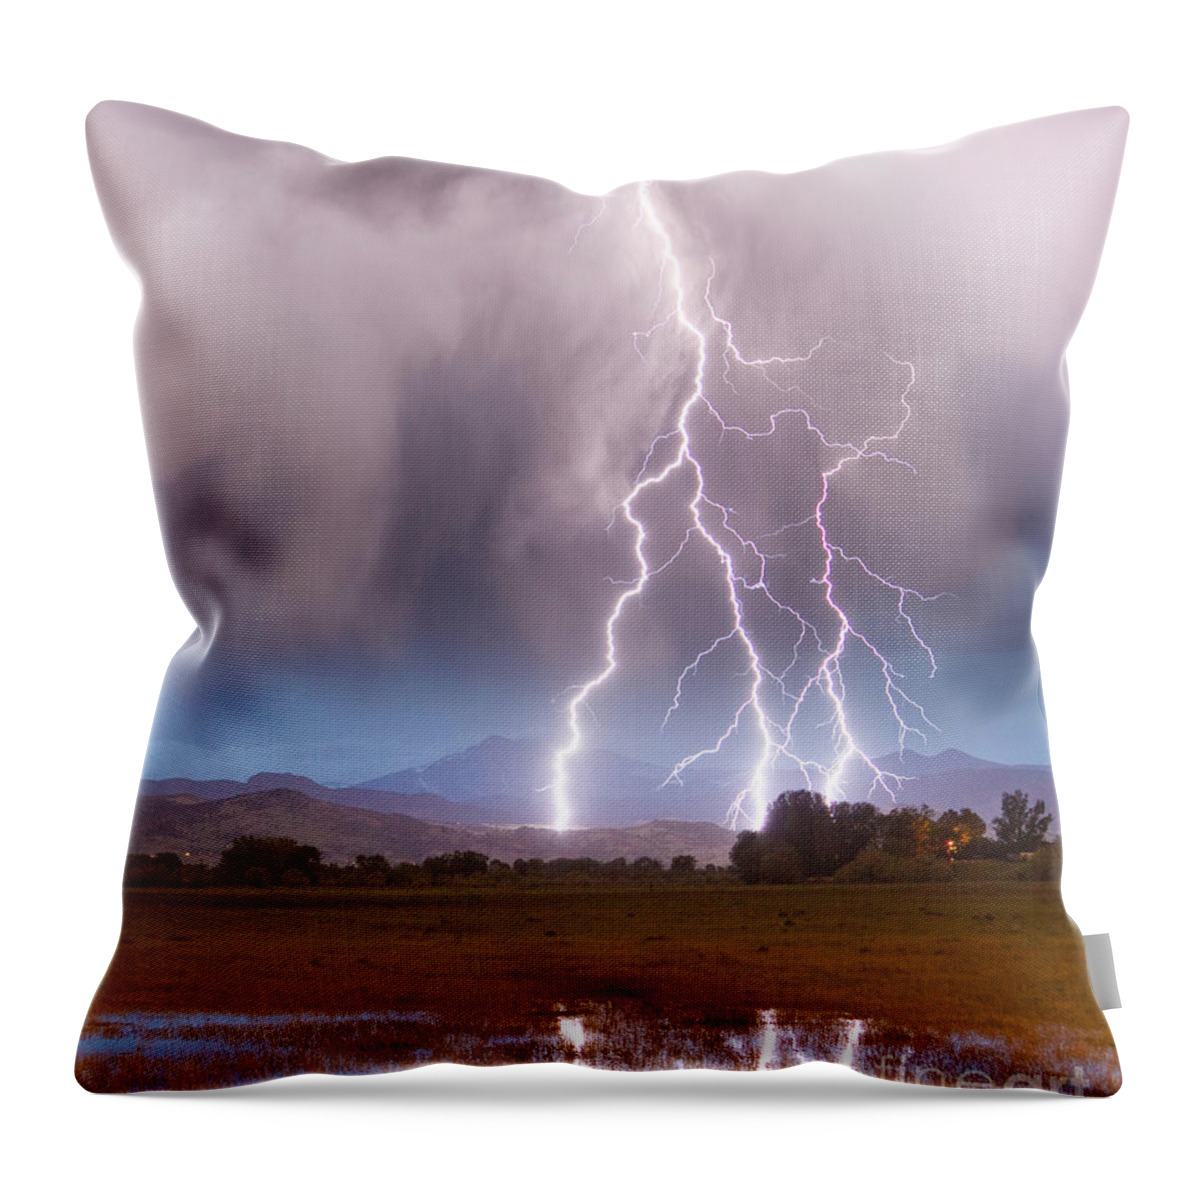 Awesome Throw Pillow featuring the photograph Lightning Striking Longs Peak Foothills 6 #1 by James BO Insogna